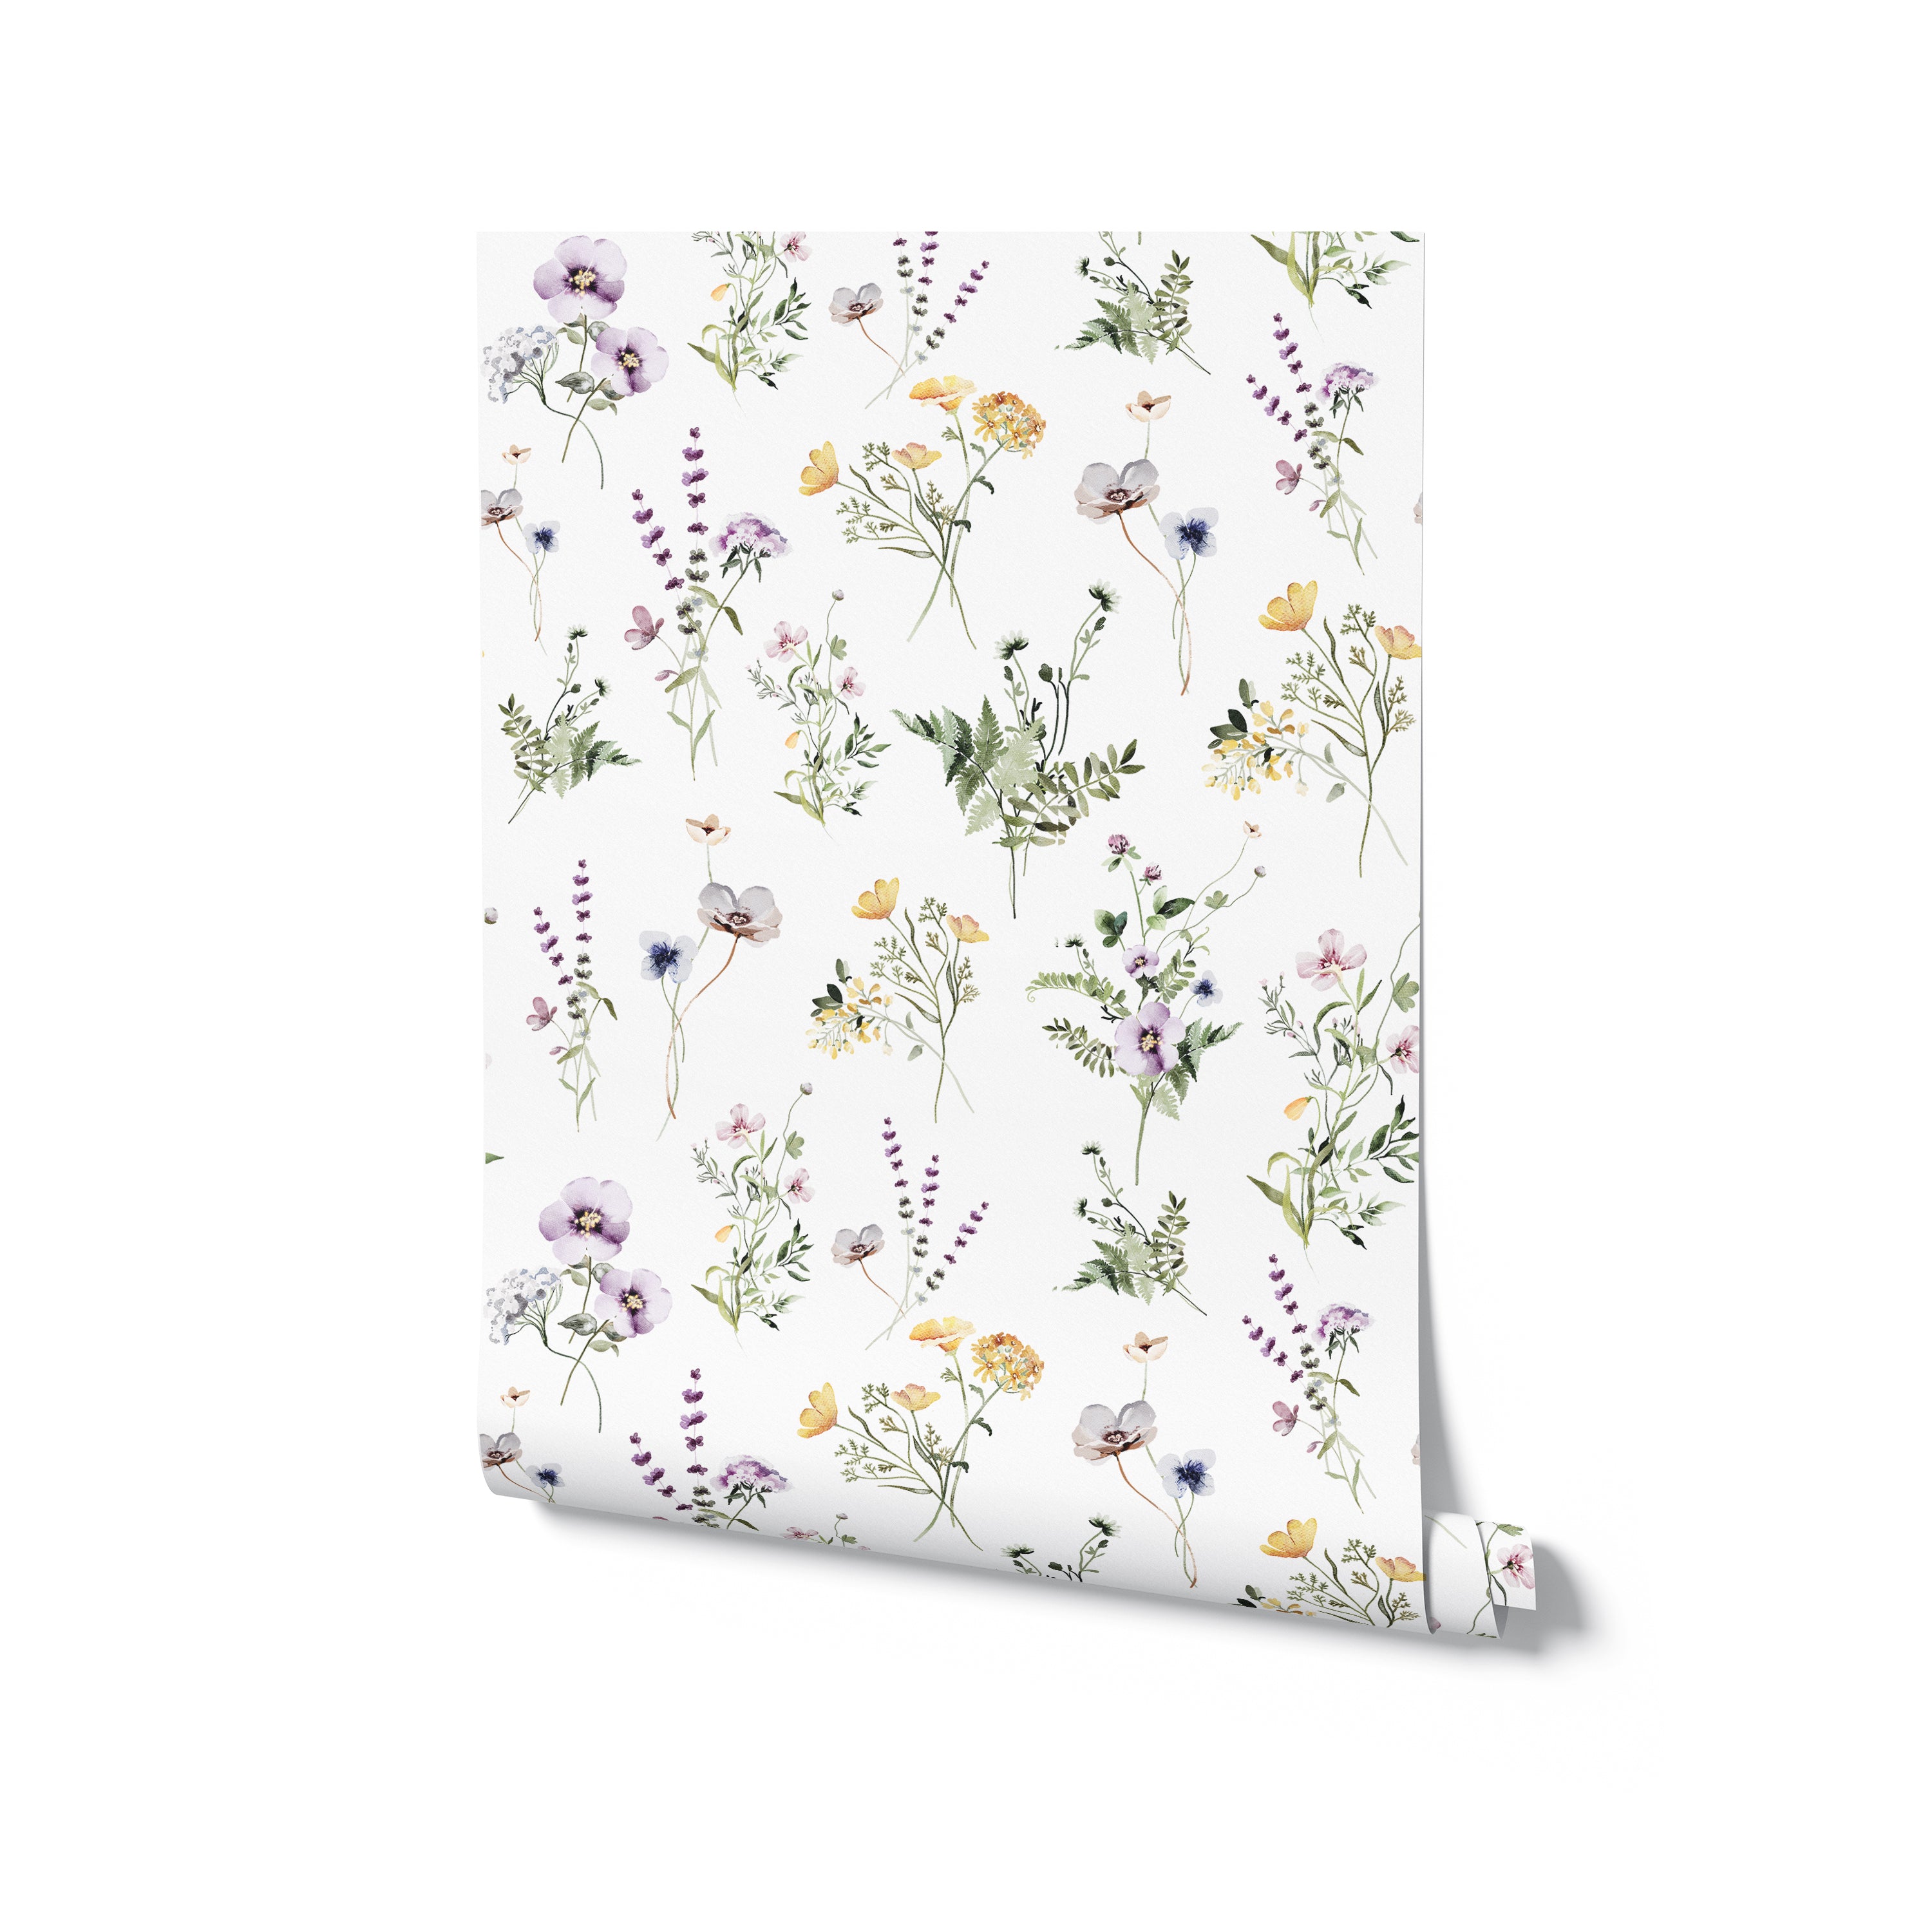 A roll of Midsummer Watercolour Bouquet Wallpaper with a white background adorned with an array of watercolor flowers and plants. The realistic portrayal of various wildflowers creates a vibrant and inviting pattern that captures the essence of a peaceful summer meadow